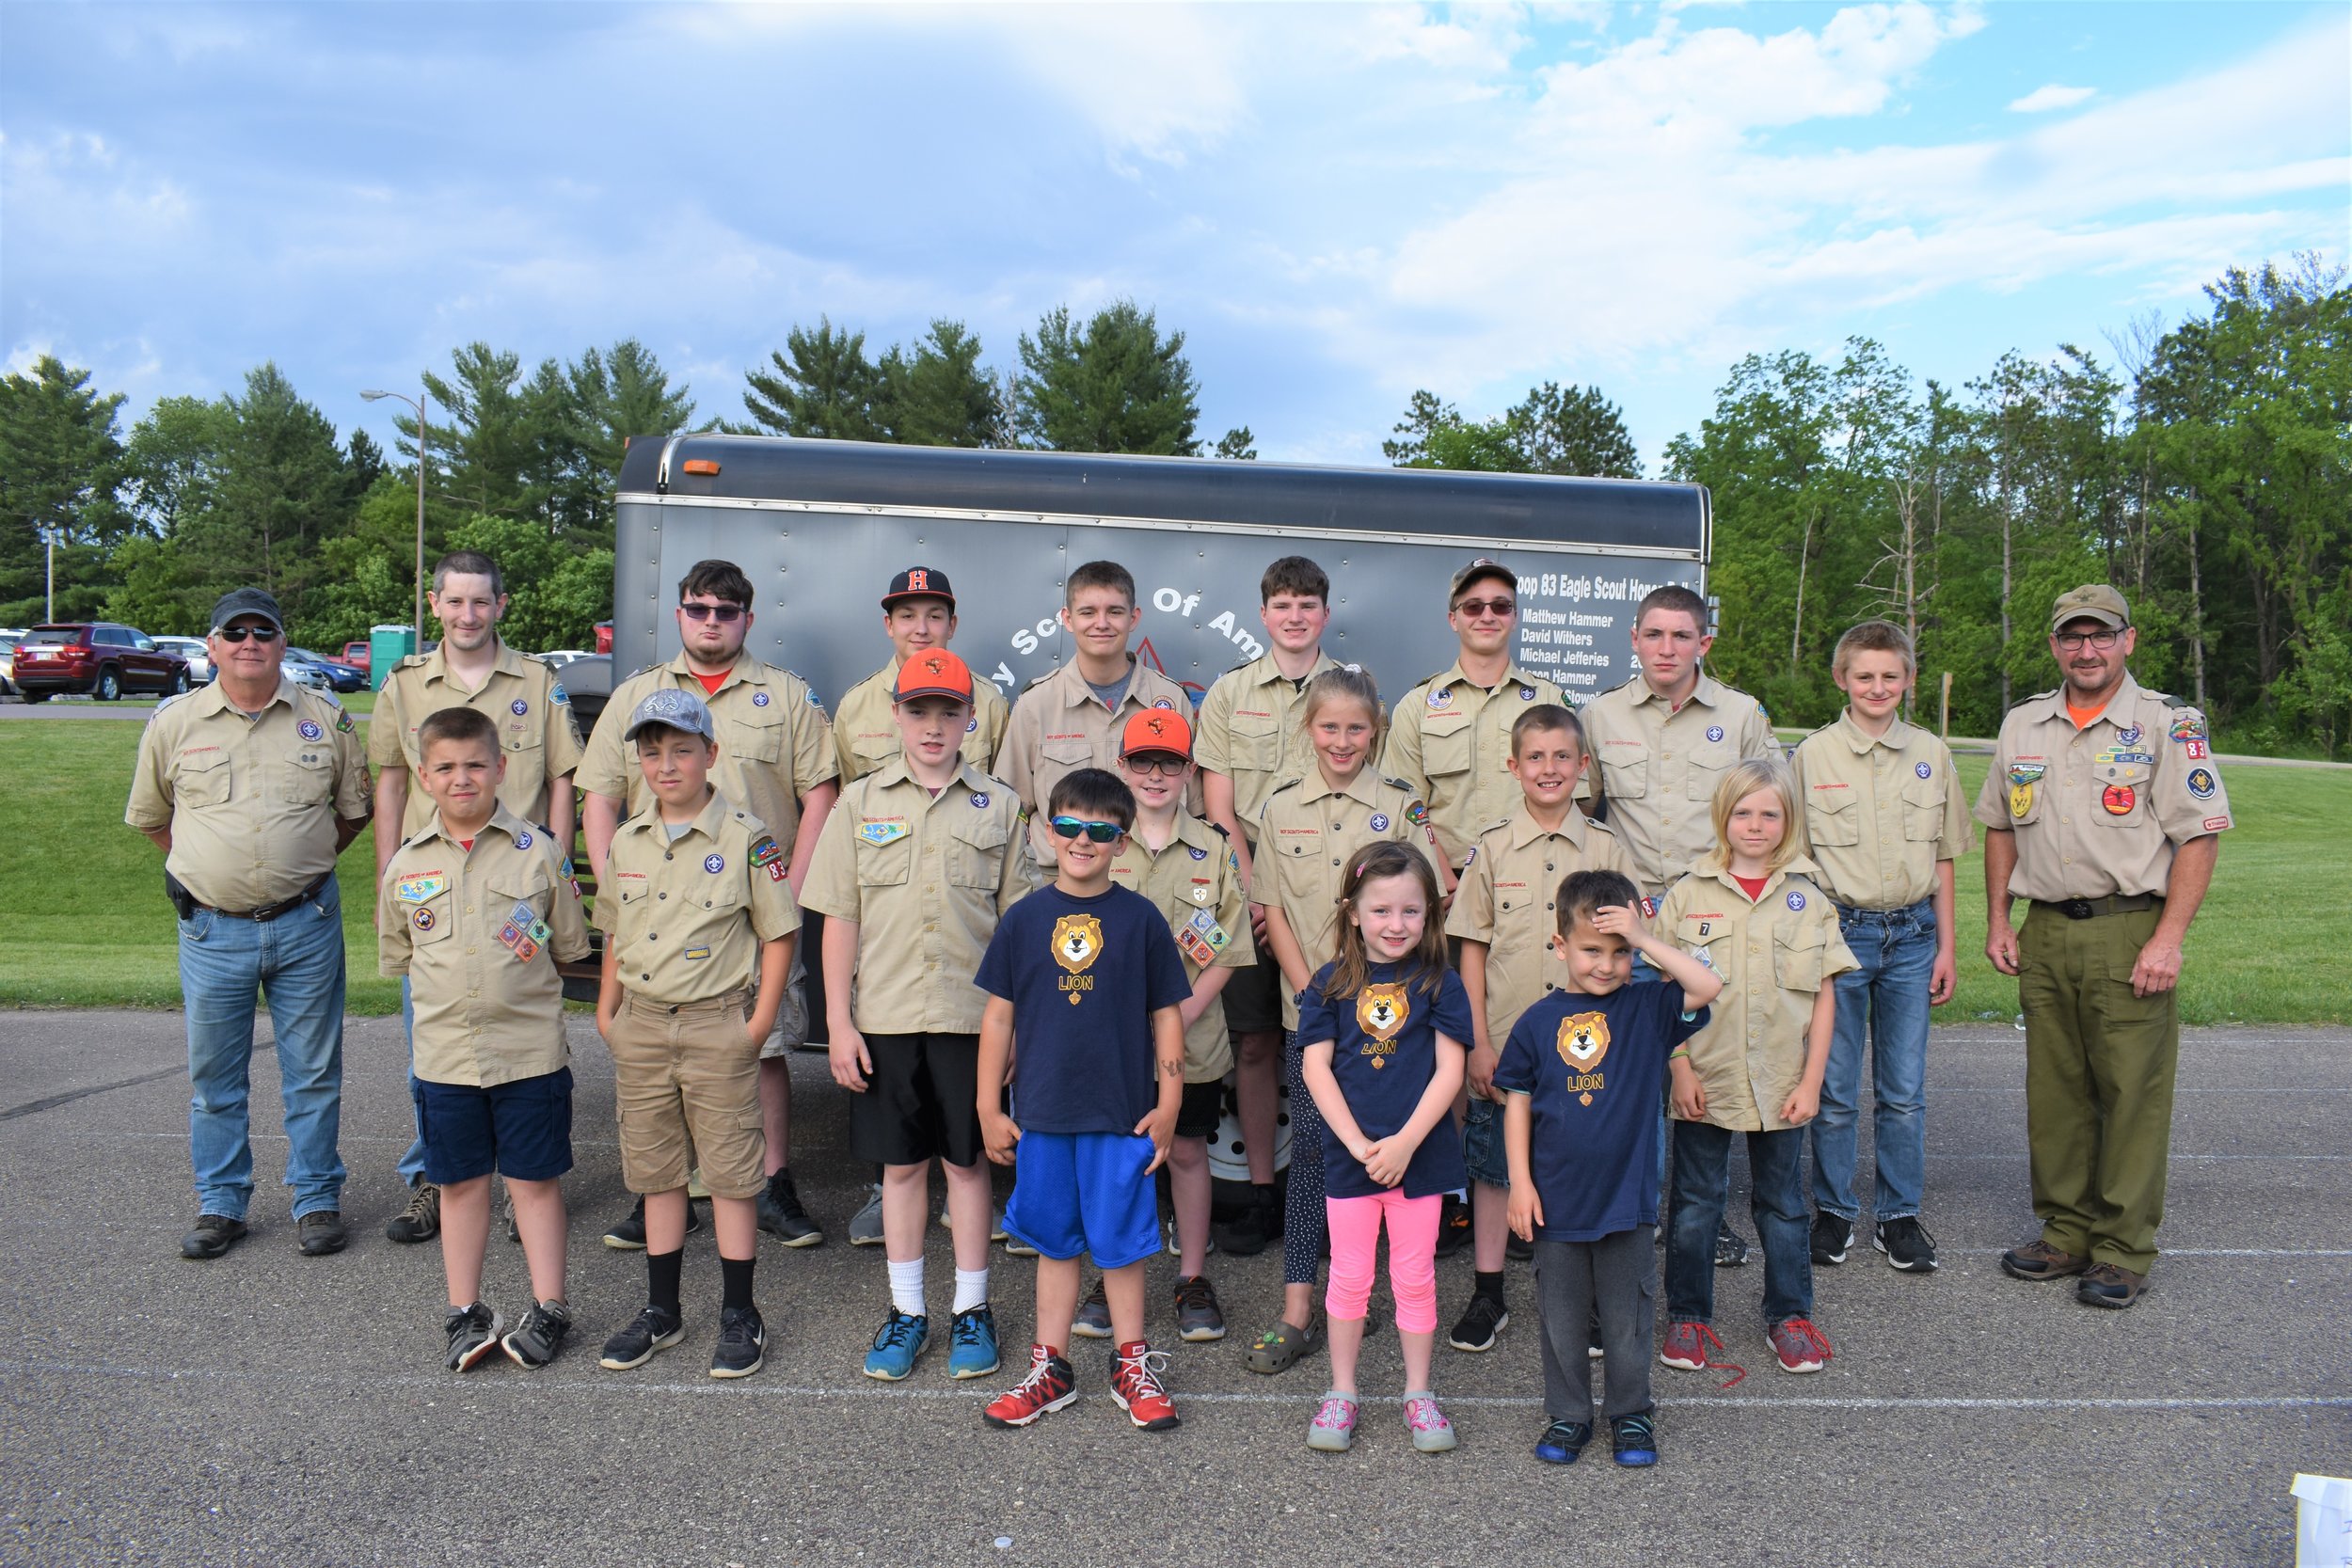  Scouts in service representing Troop 83, Cub scouts Pack 83, and Elroy Troop 88 Front row L to R- Westin, Abby, and Brock. Second row L to R- Bryce, Nick, Marty, Marshall, Lauren, Eddie, and Oliver. Back row L to R- Scout Leaders Don Hammer and Ryan